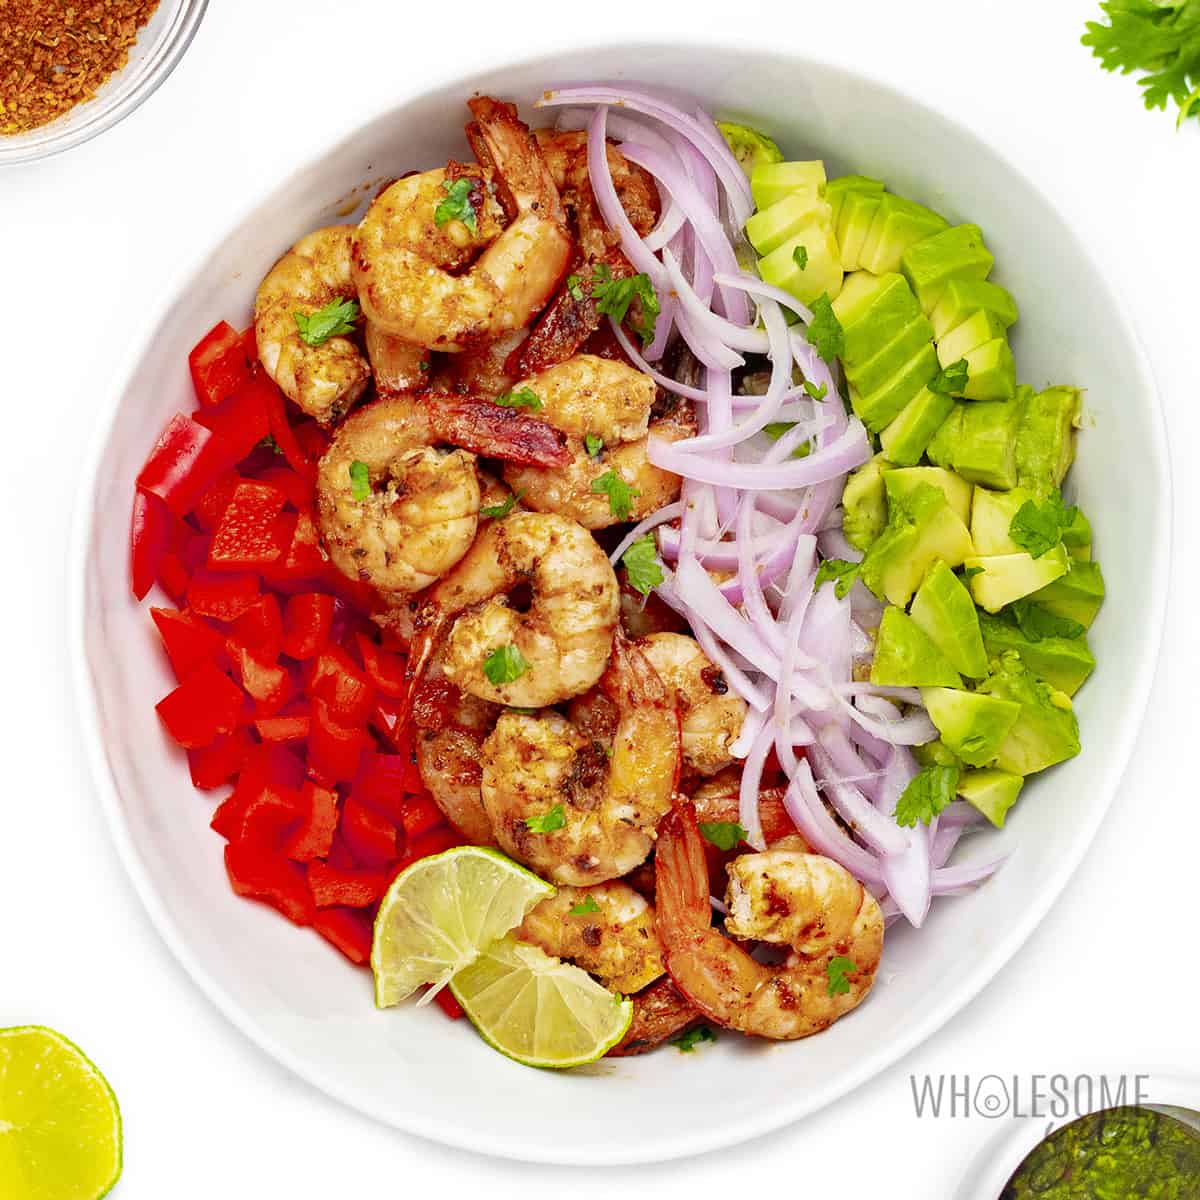 Shrimp and avocado salad ingredients in a bowl before tossing in dressing.